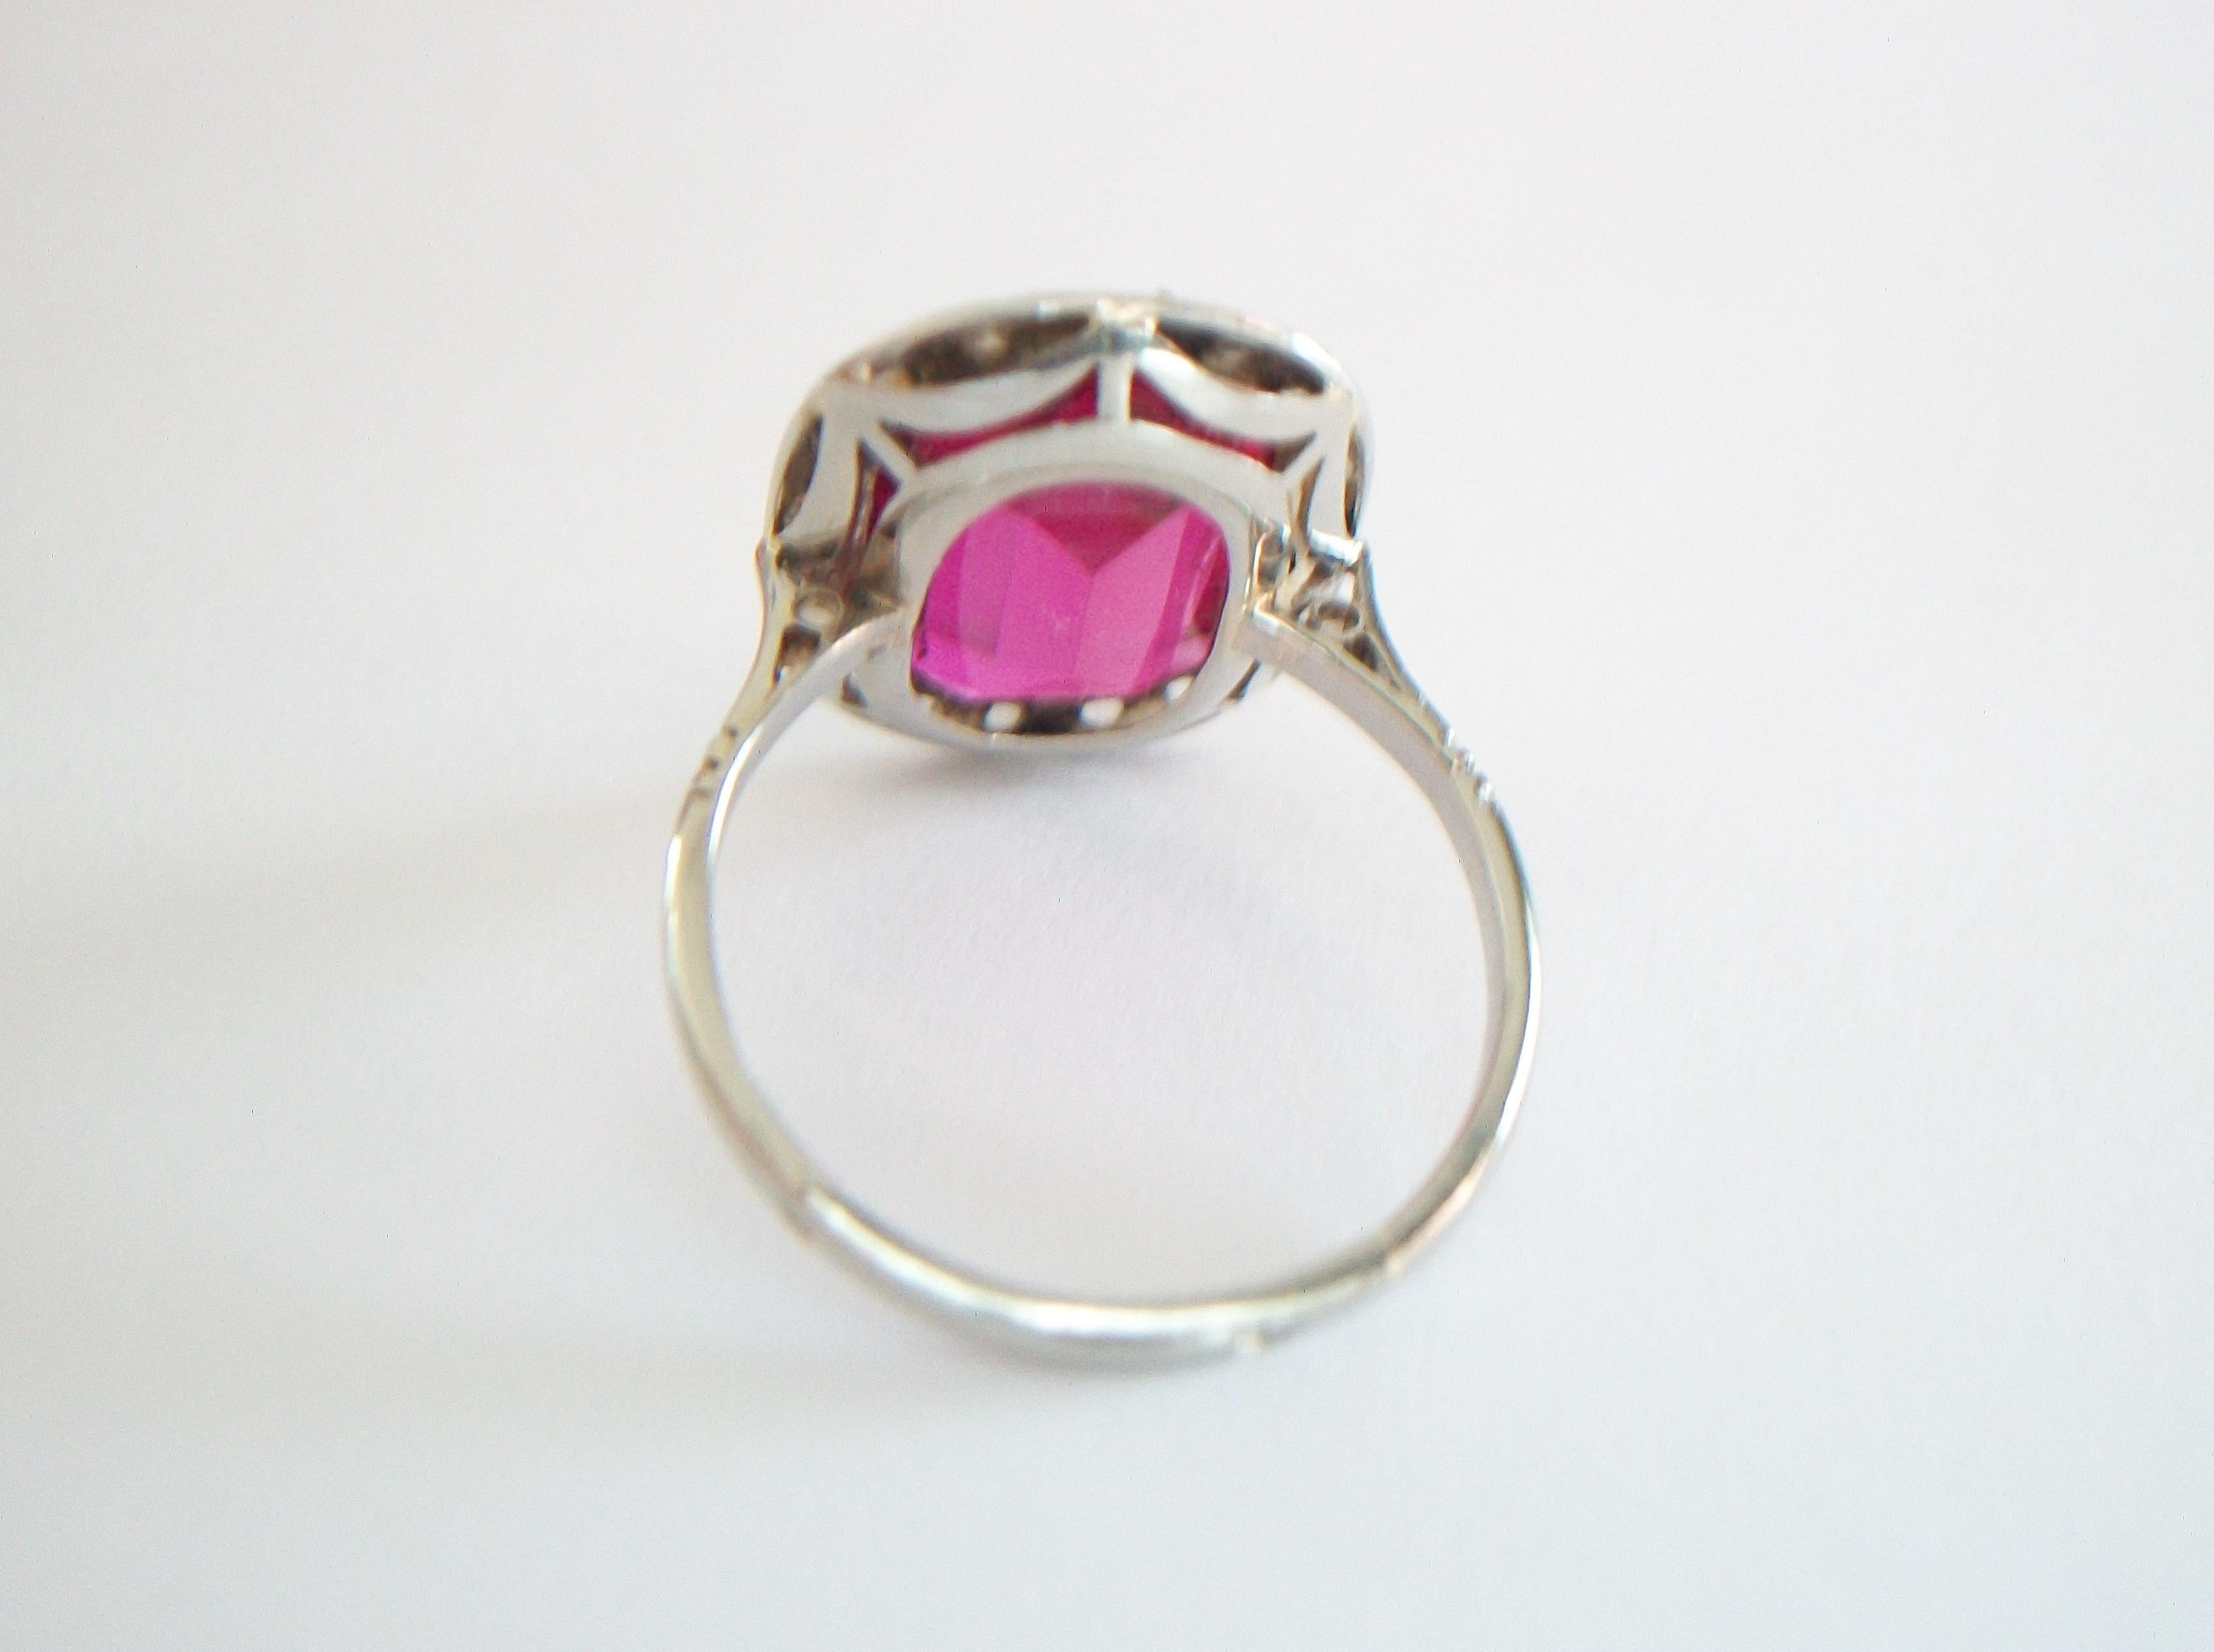 Women's French Art Deco Synthetic Ruby & Diamond Halo Ring, 18K Gold, Circa 1920's For Sale